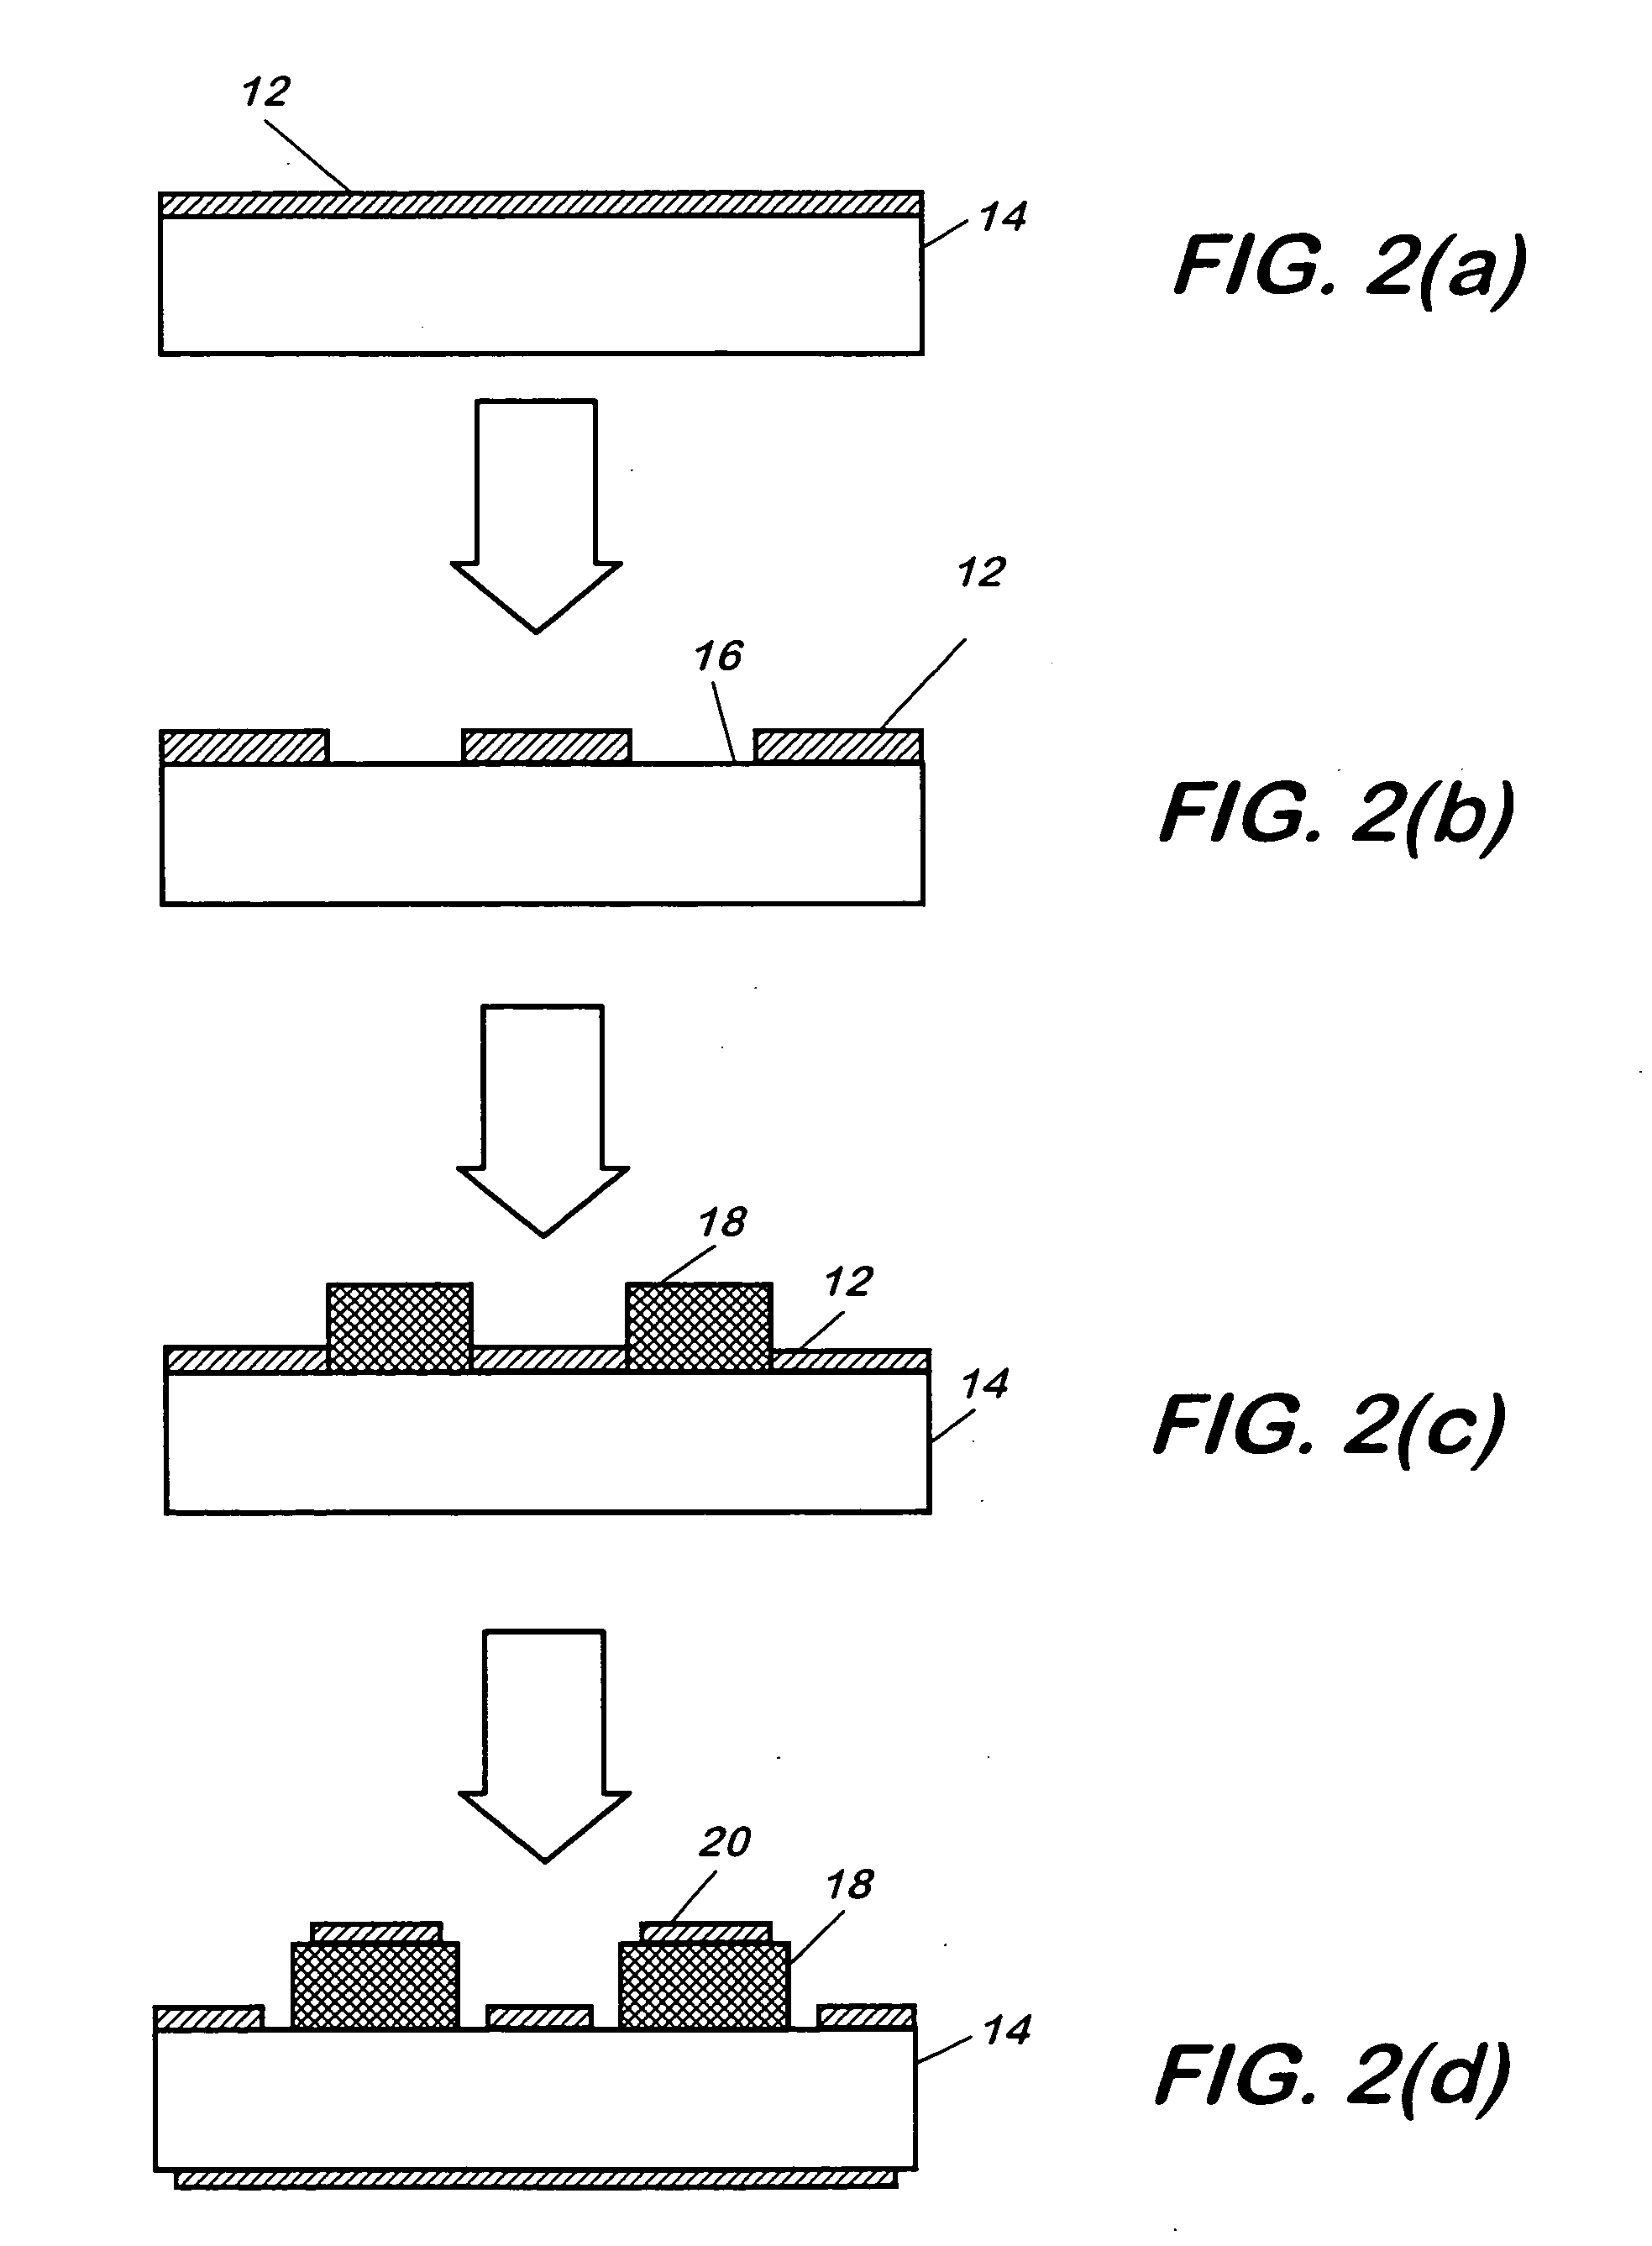 Technique for perfecting the active regions of wide bandgap semiconductor nitride devices